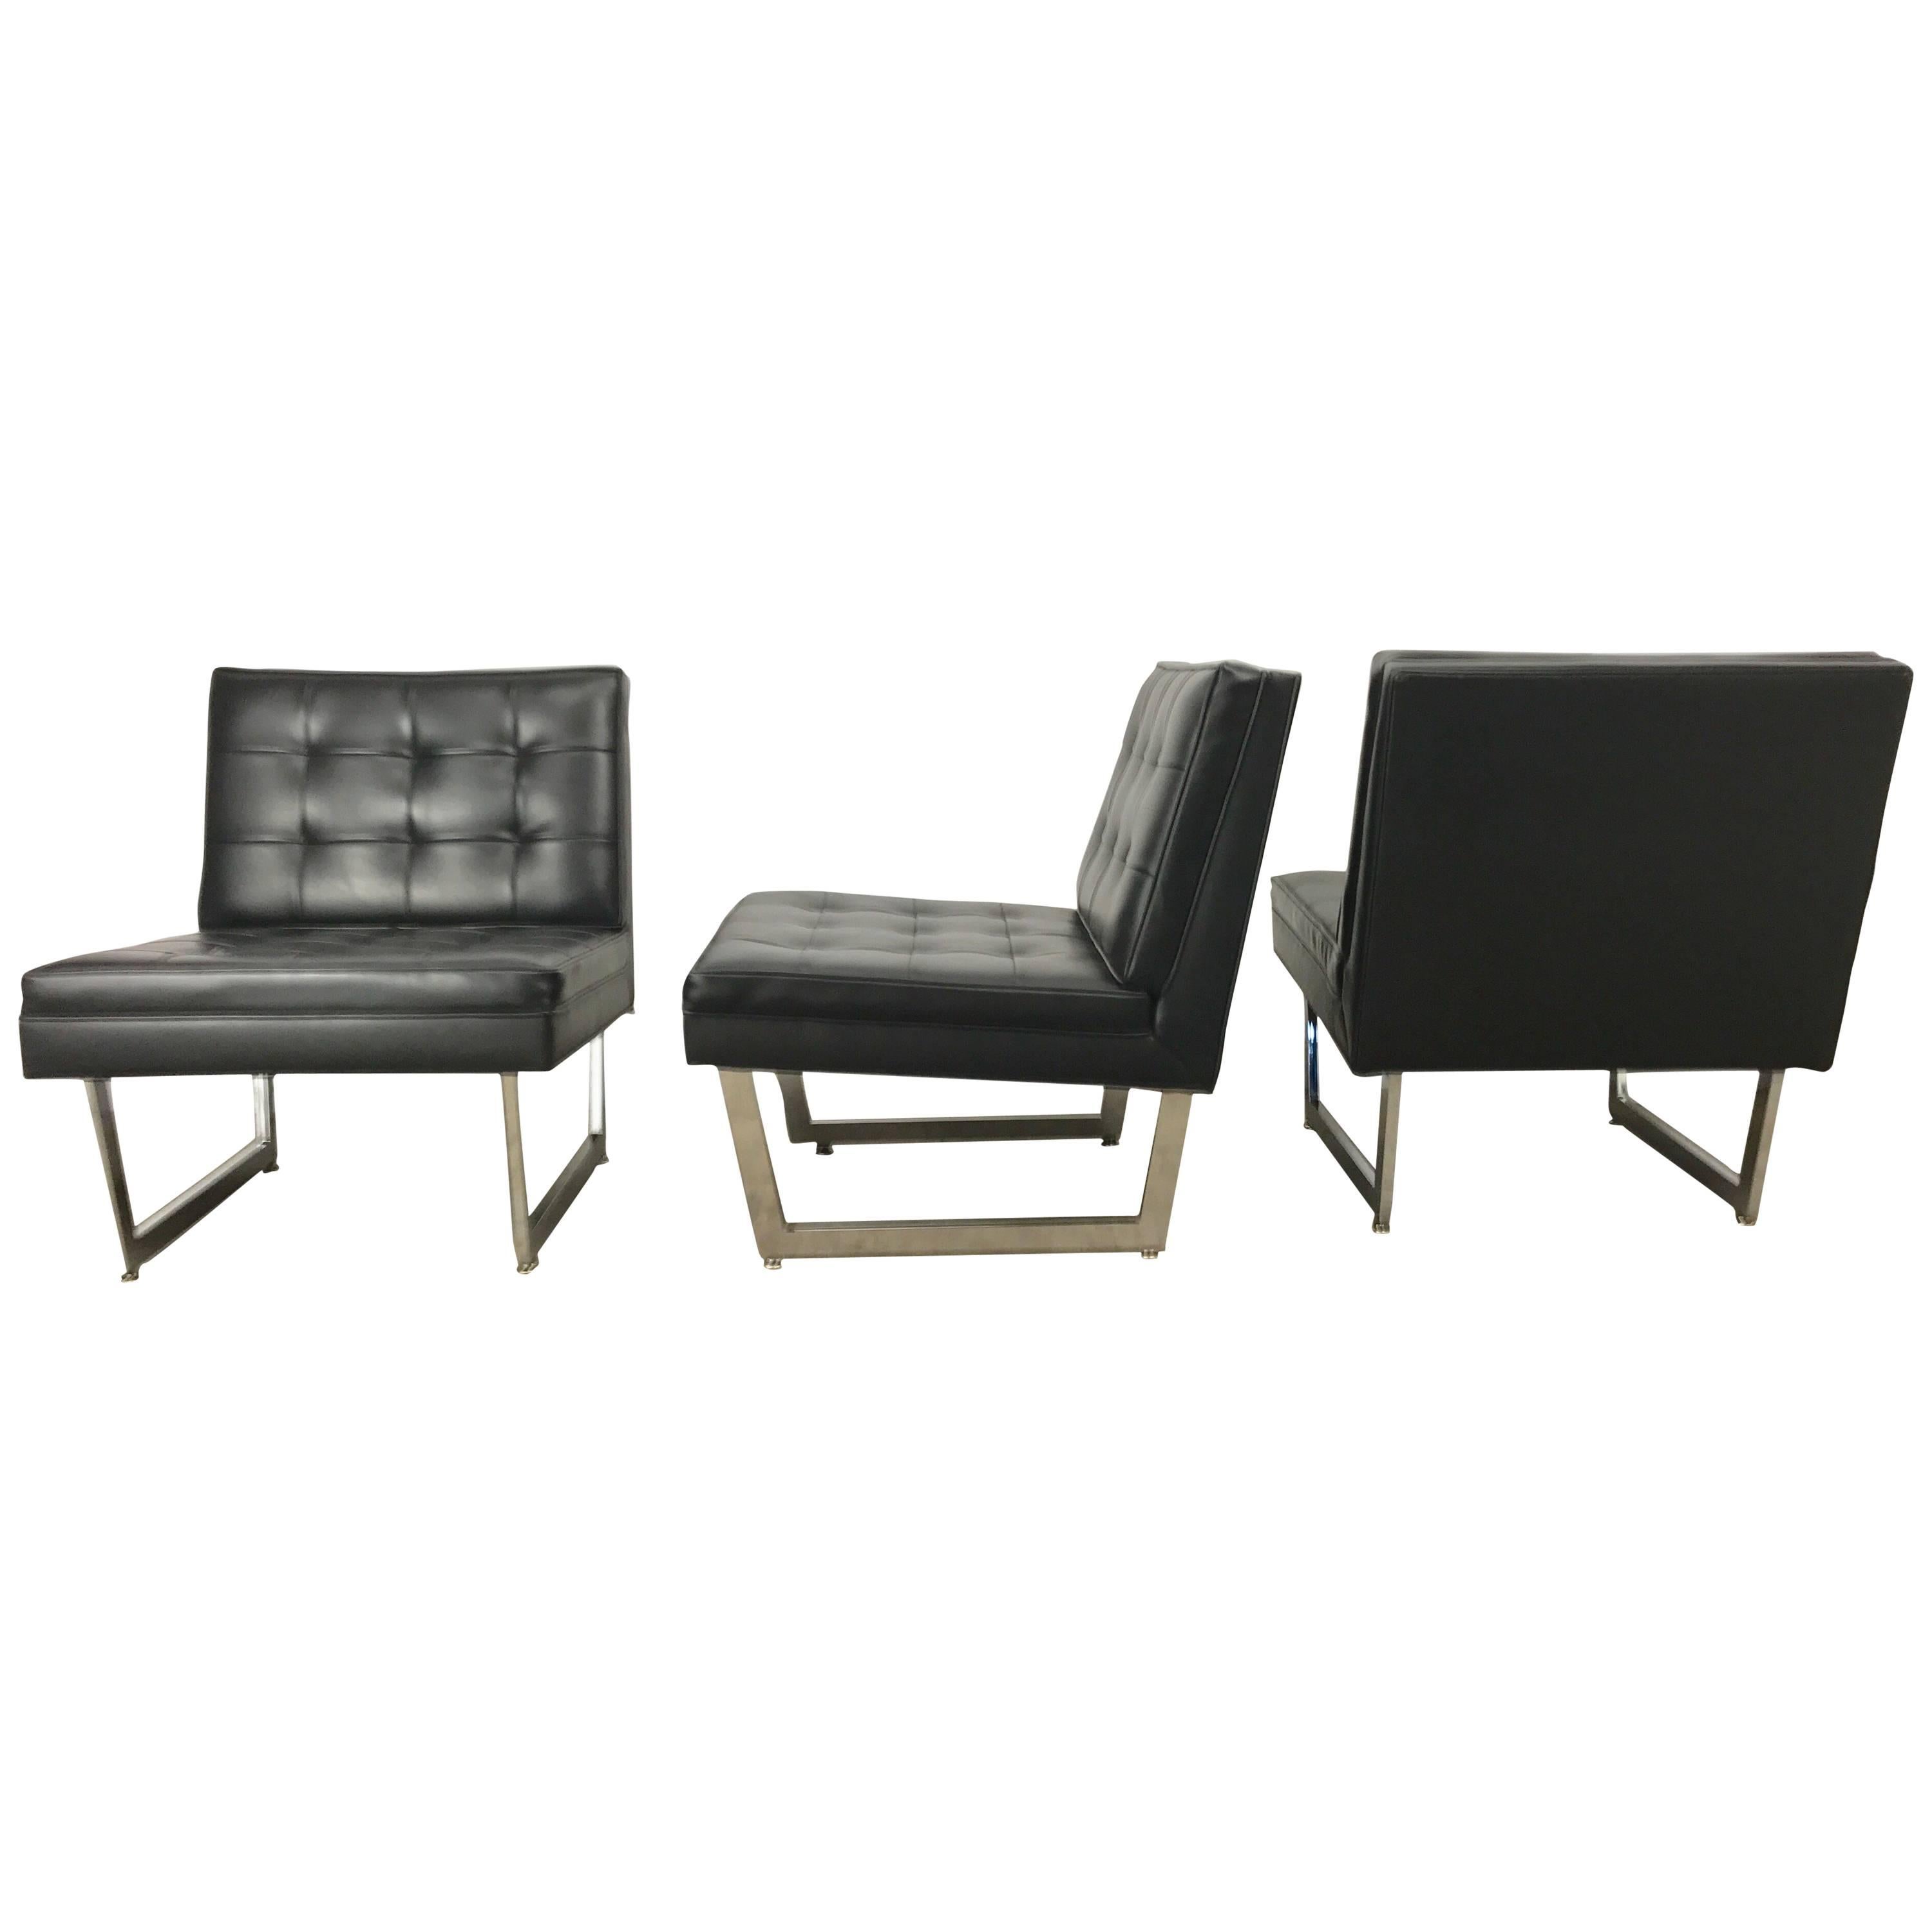 Black and Chrome Modular Seating, Button Tufted Sofa, Mies Tugenhat